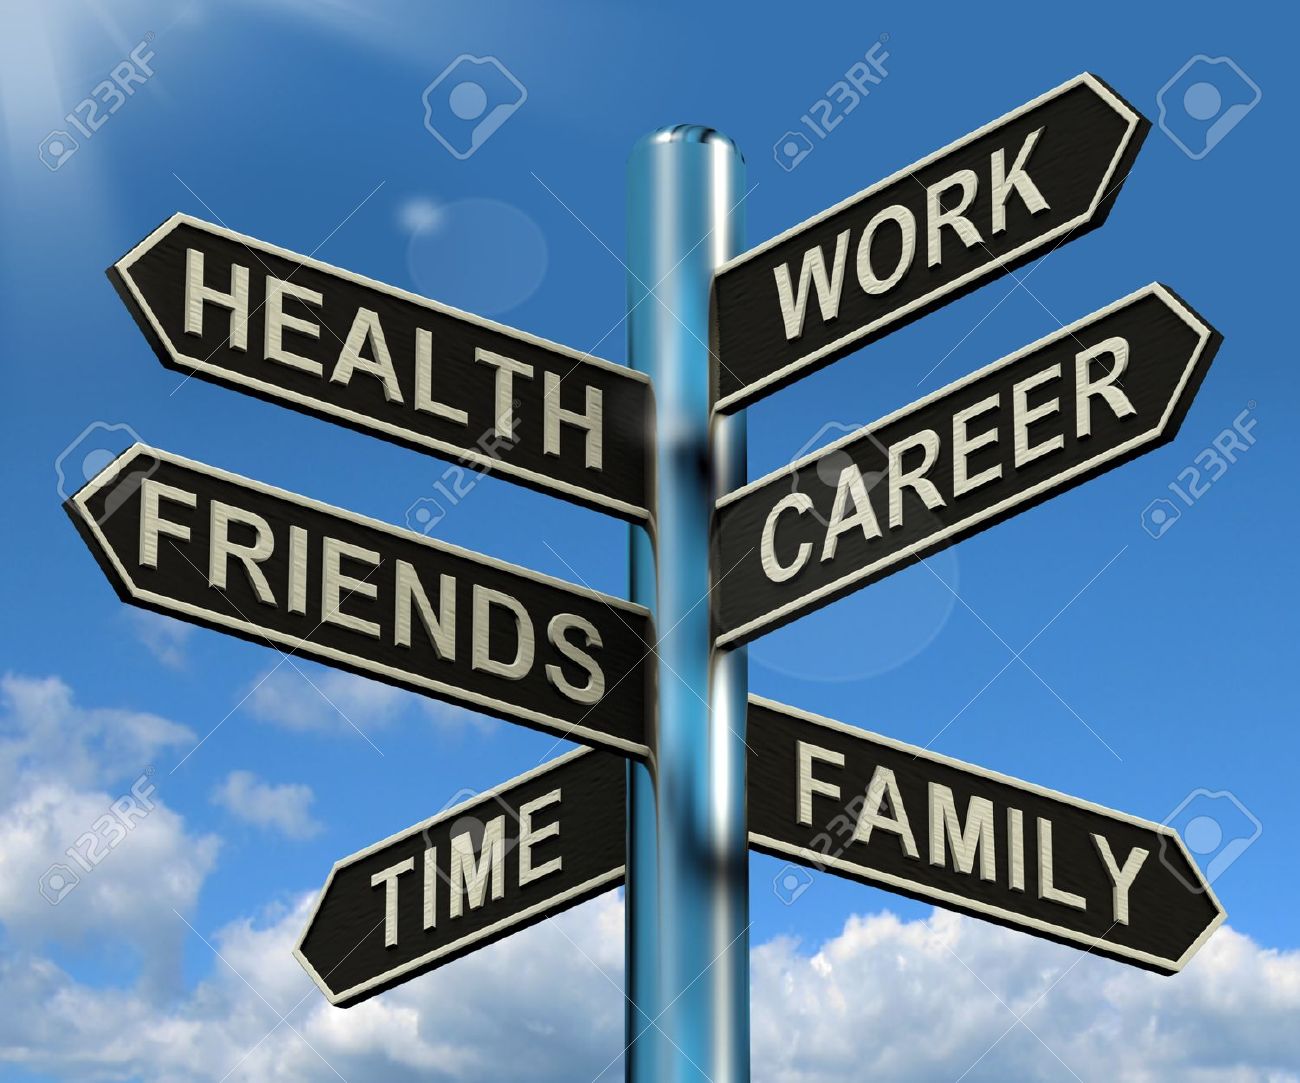 13564606-Health-Work-Career-Friends-Signpost-Shows-Life-And-Lifestyle-Balance-Stock-Photo.jpg